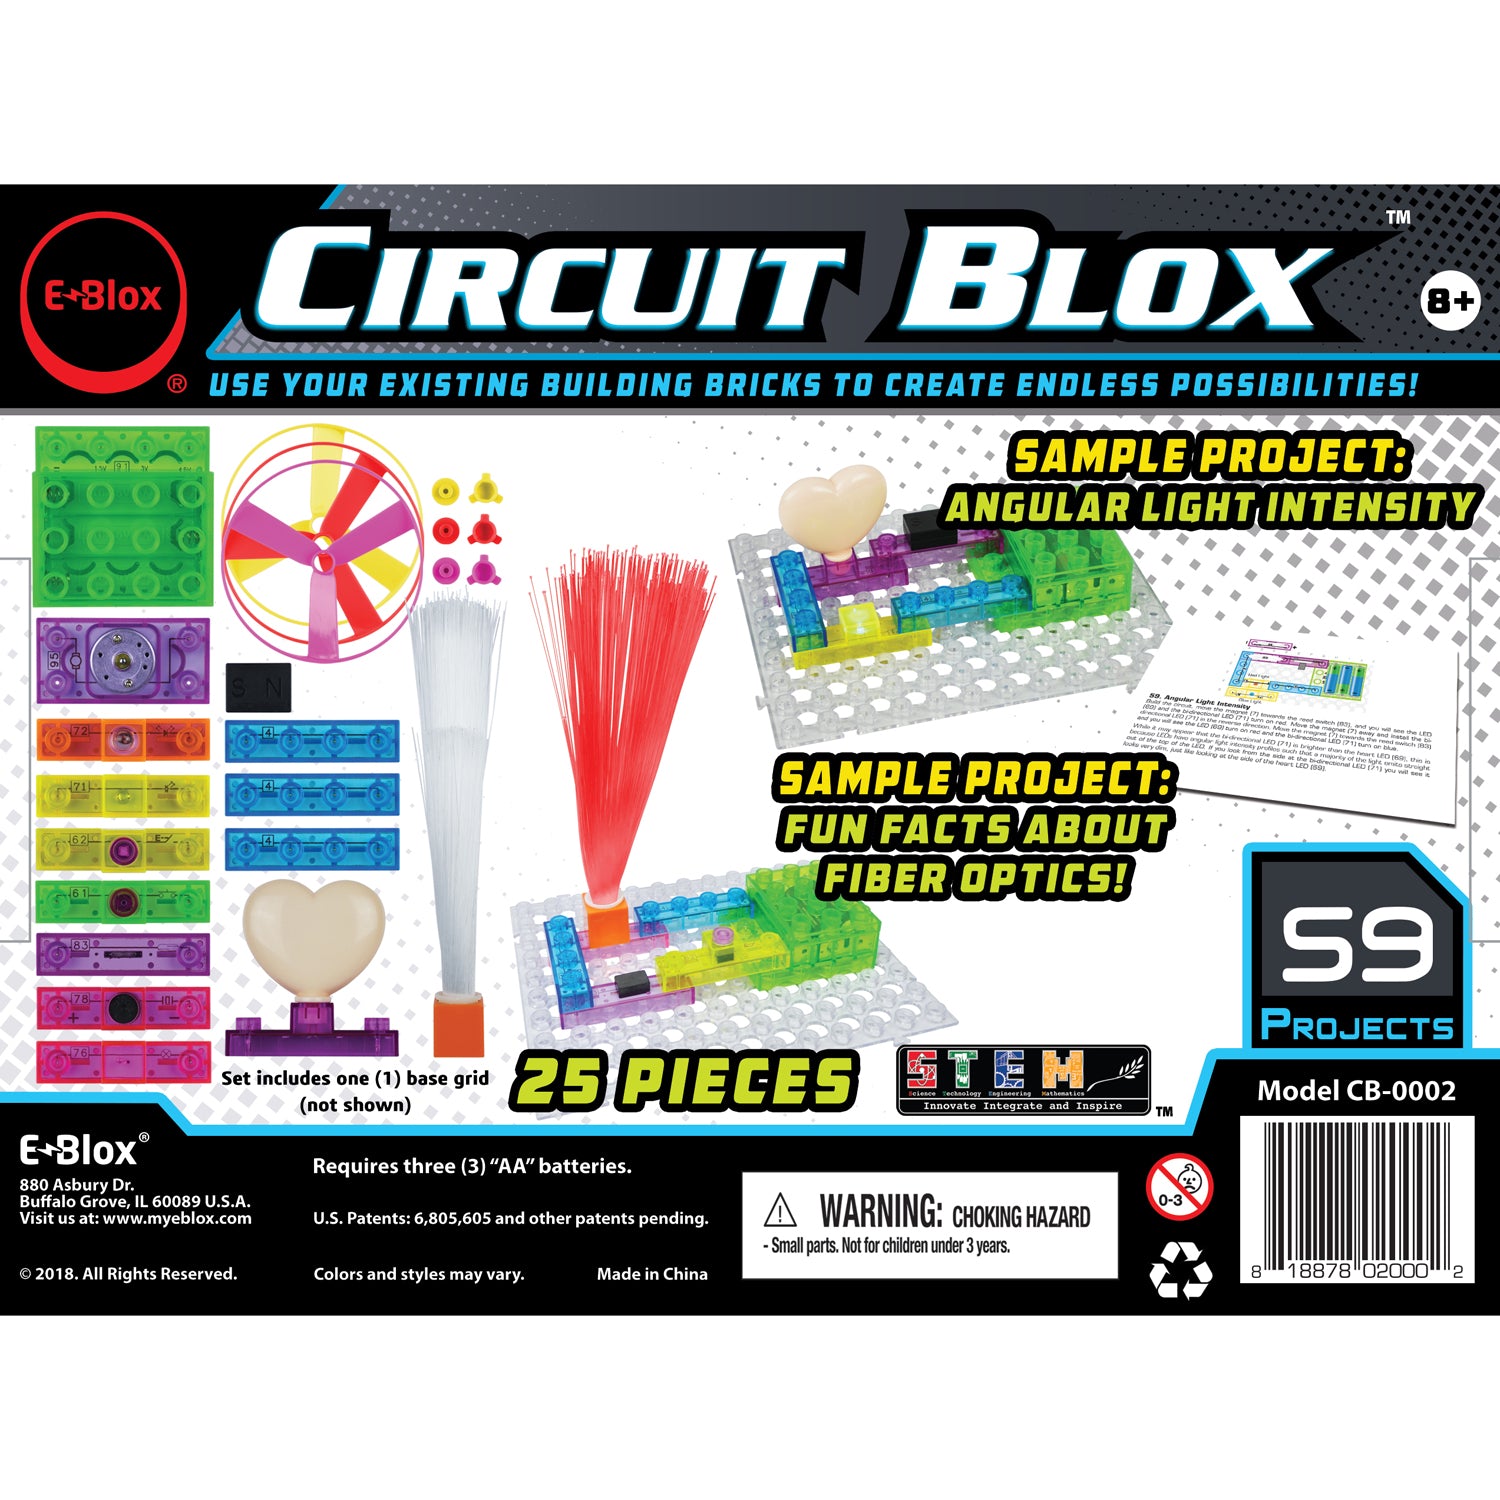 Circuit Blox™ Individual Set, 59 projects - A1 School Supplies